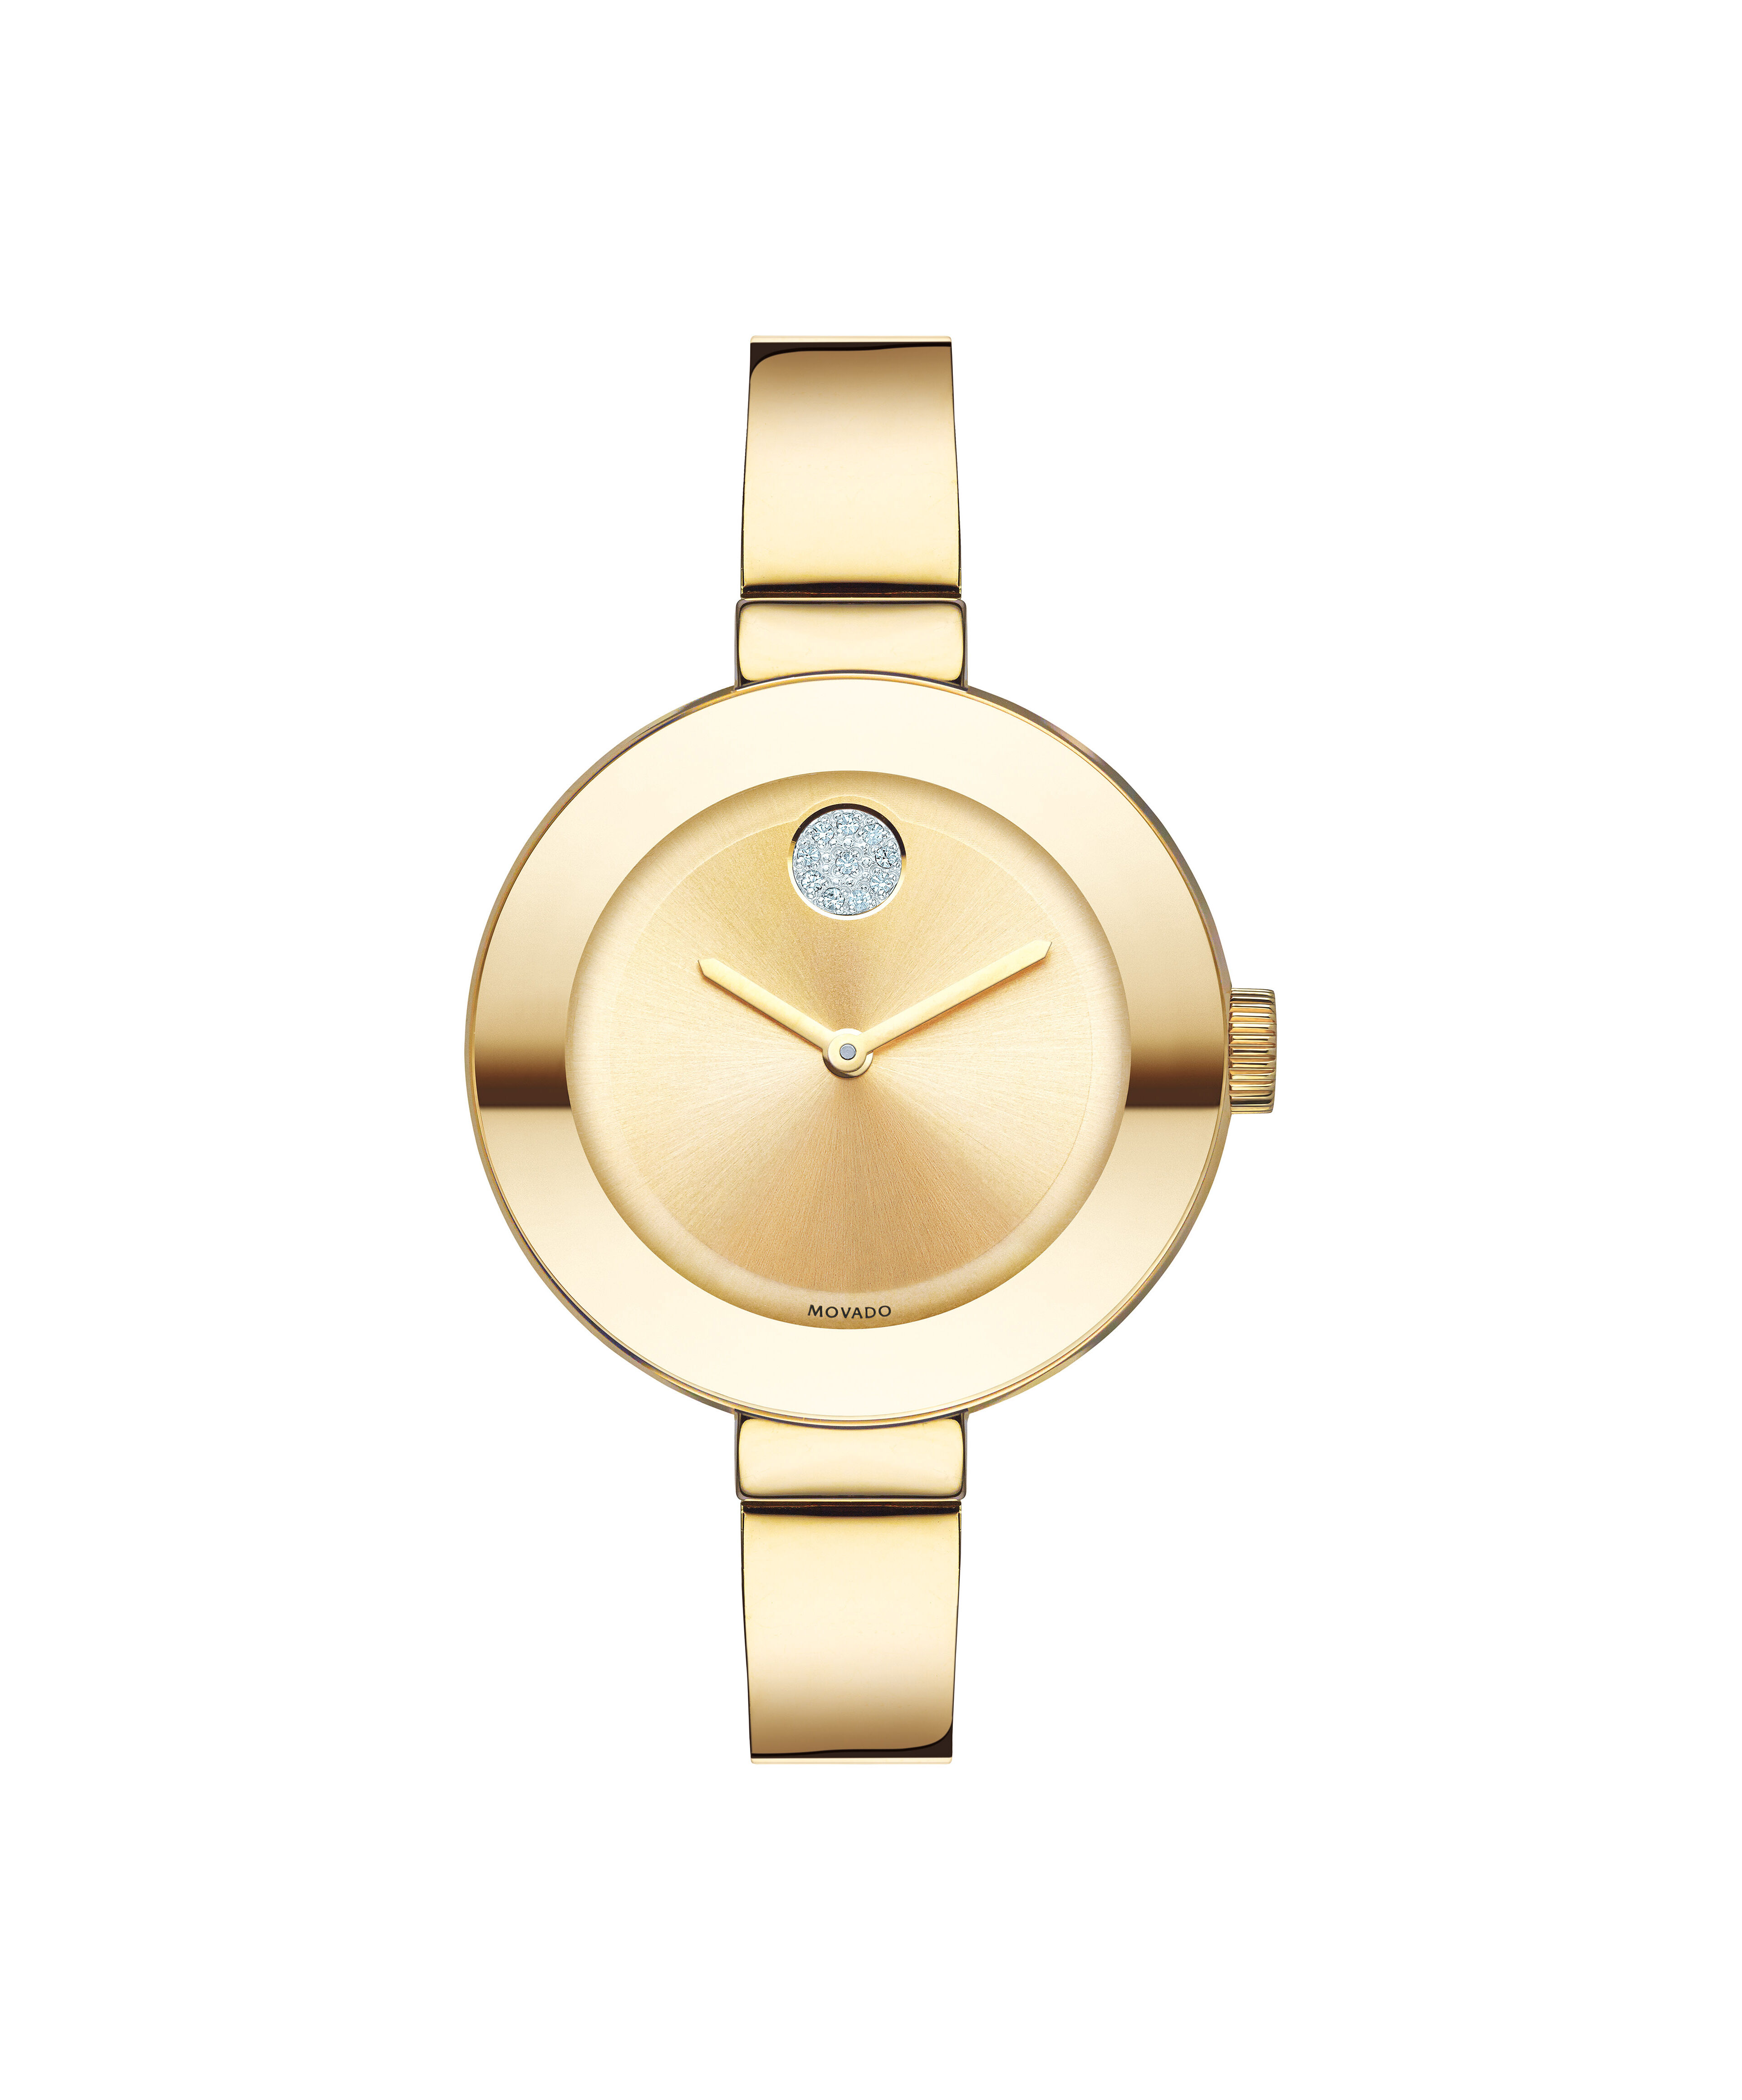 Movado Museum Ladies, MOP Dial - Yellow Gold Tone, Ref # 0606608